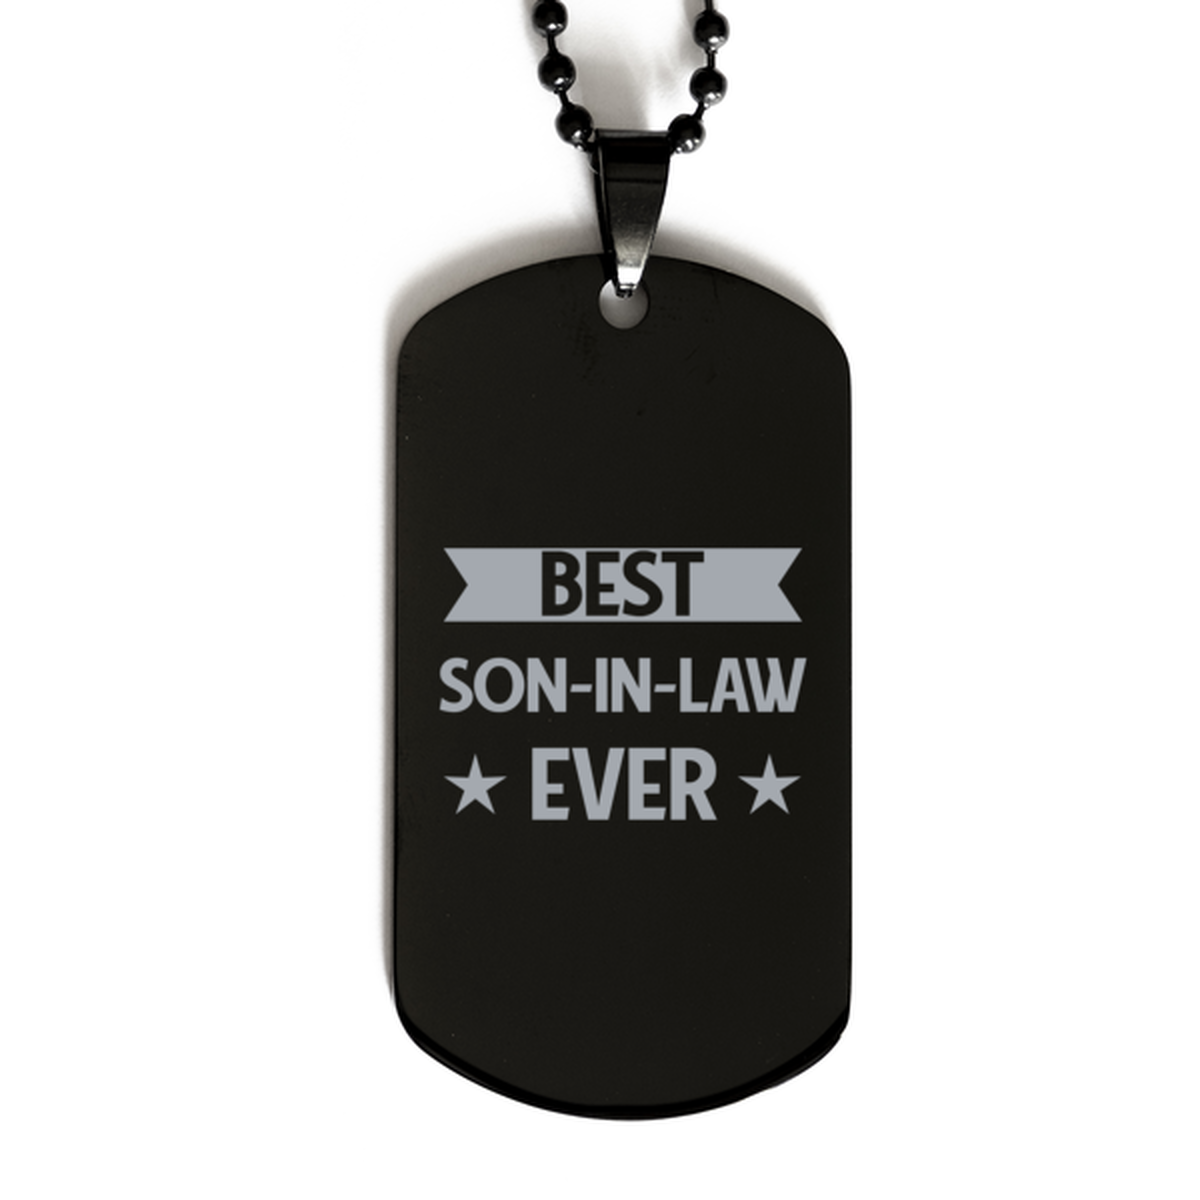 Best Son-in-law Ever Son-in-law Gifts, Funny Black Dog Tag For Son-in-law, Birthday Family Presents Engraved Necklace For Men